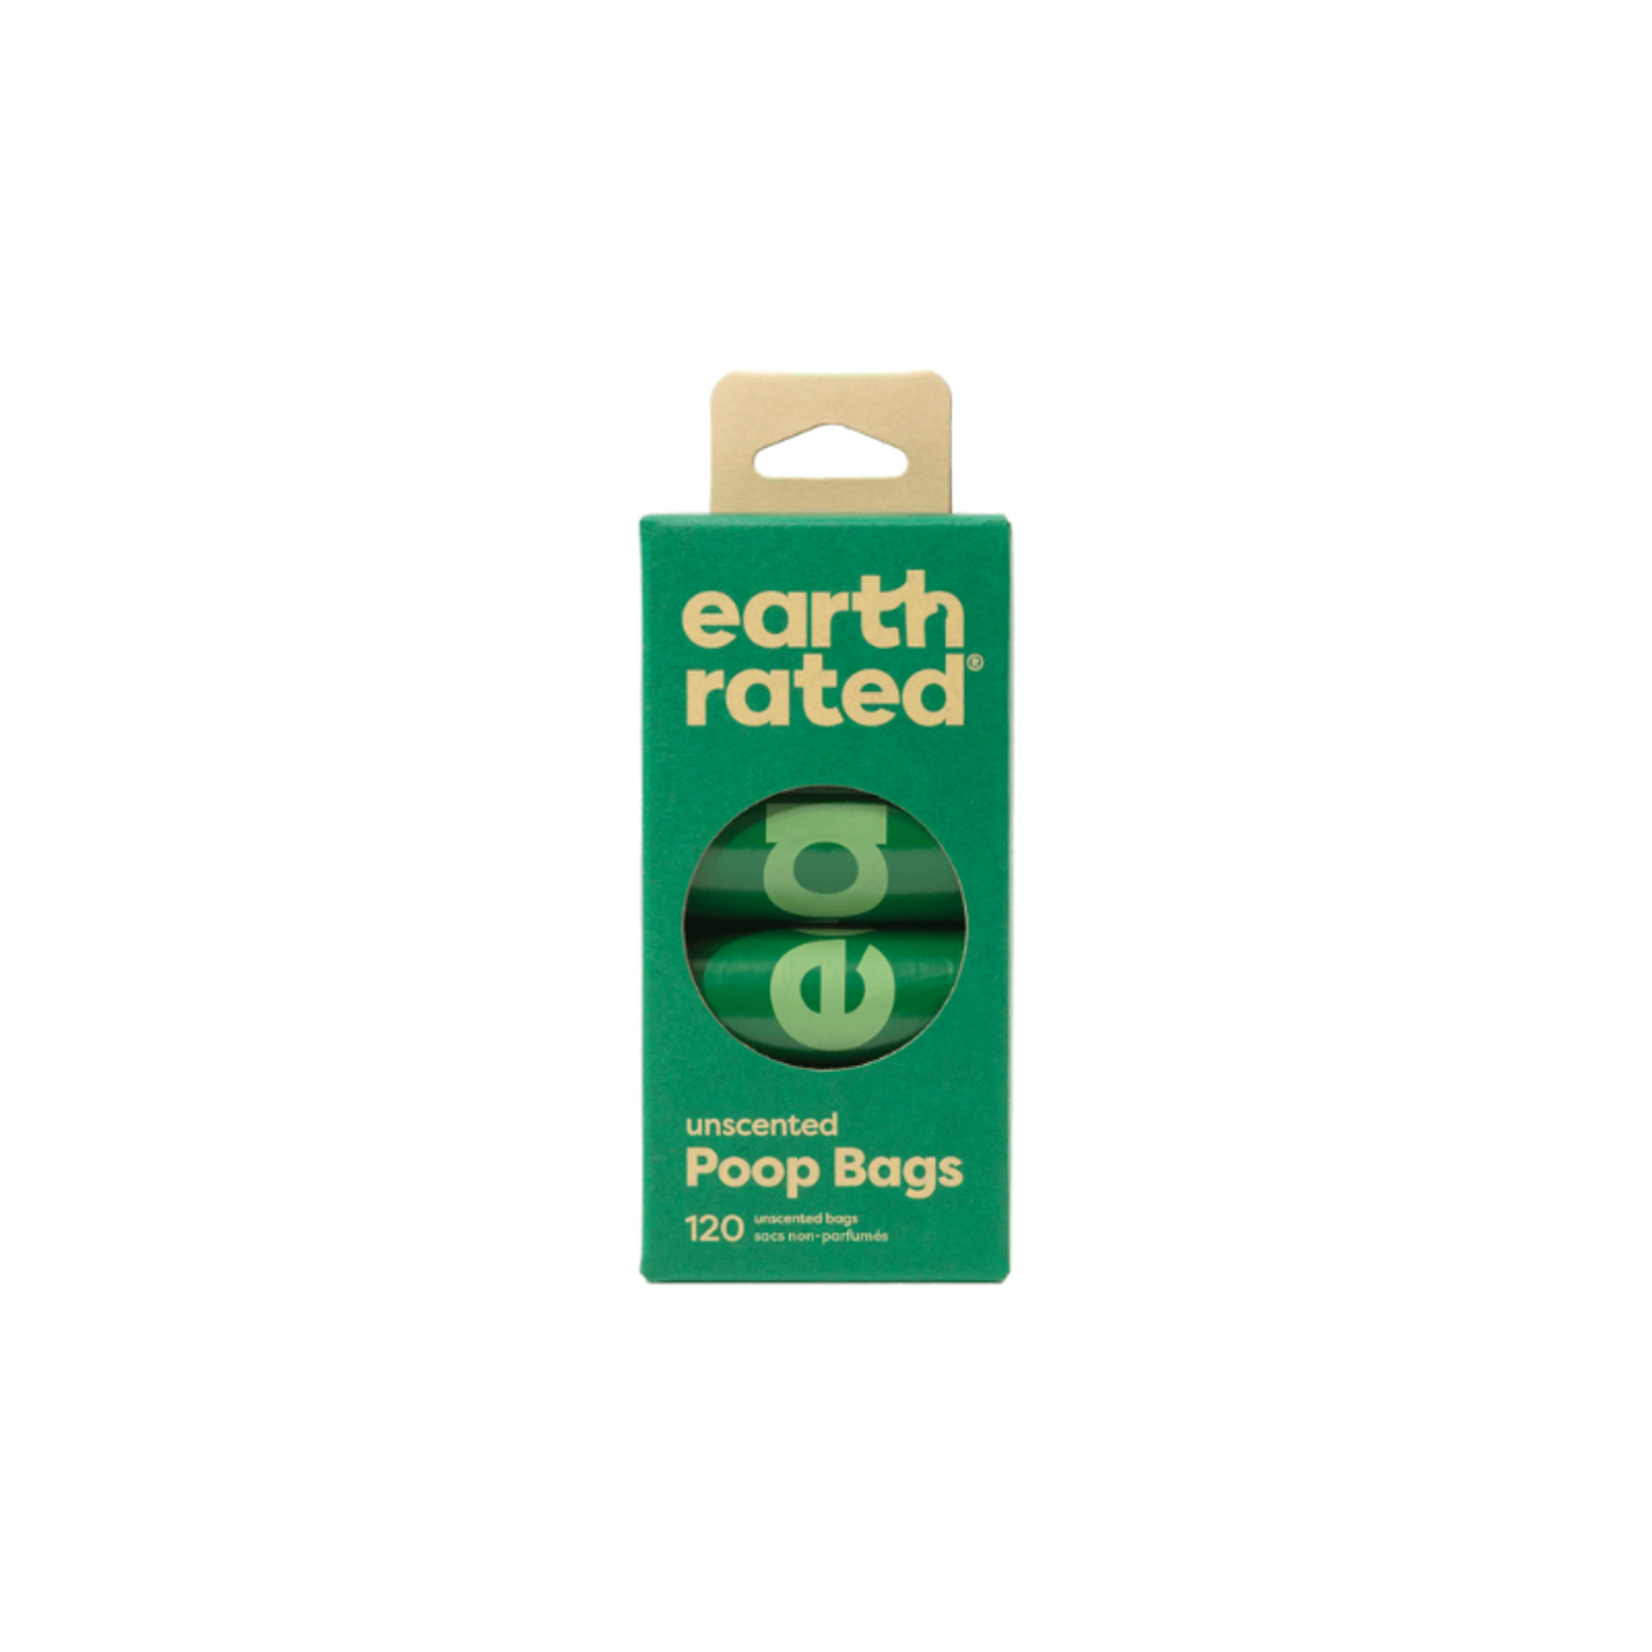 Earth Rated Refill Rolls - 315 Pack / 120 Pack - Lavender or Unscented - Poop Bags - Earth Rated